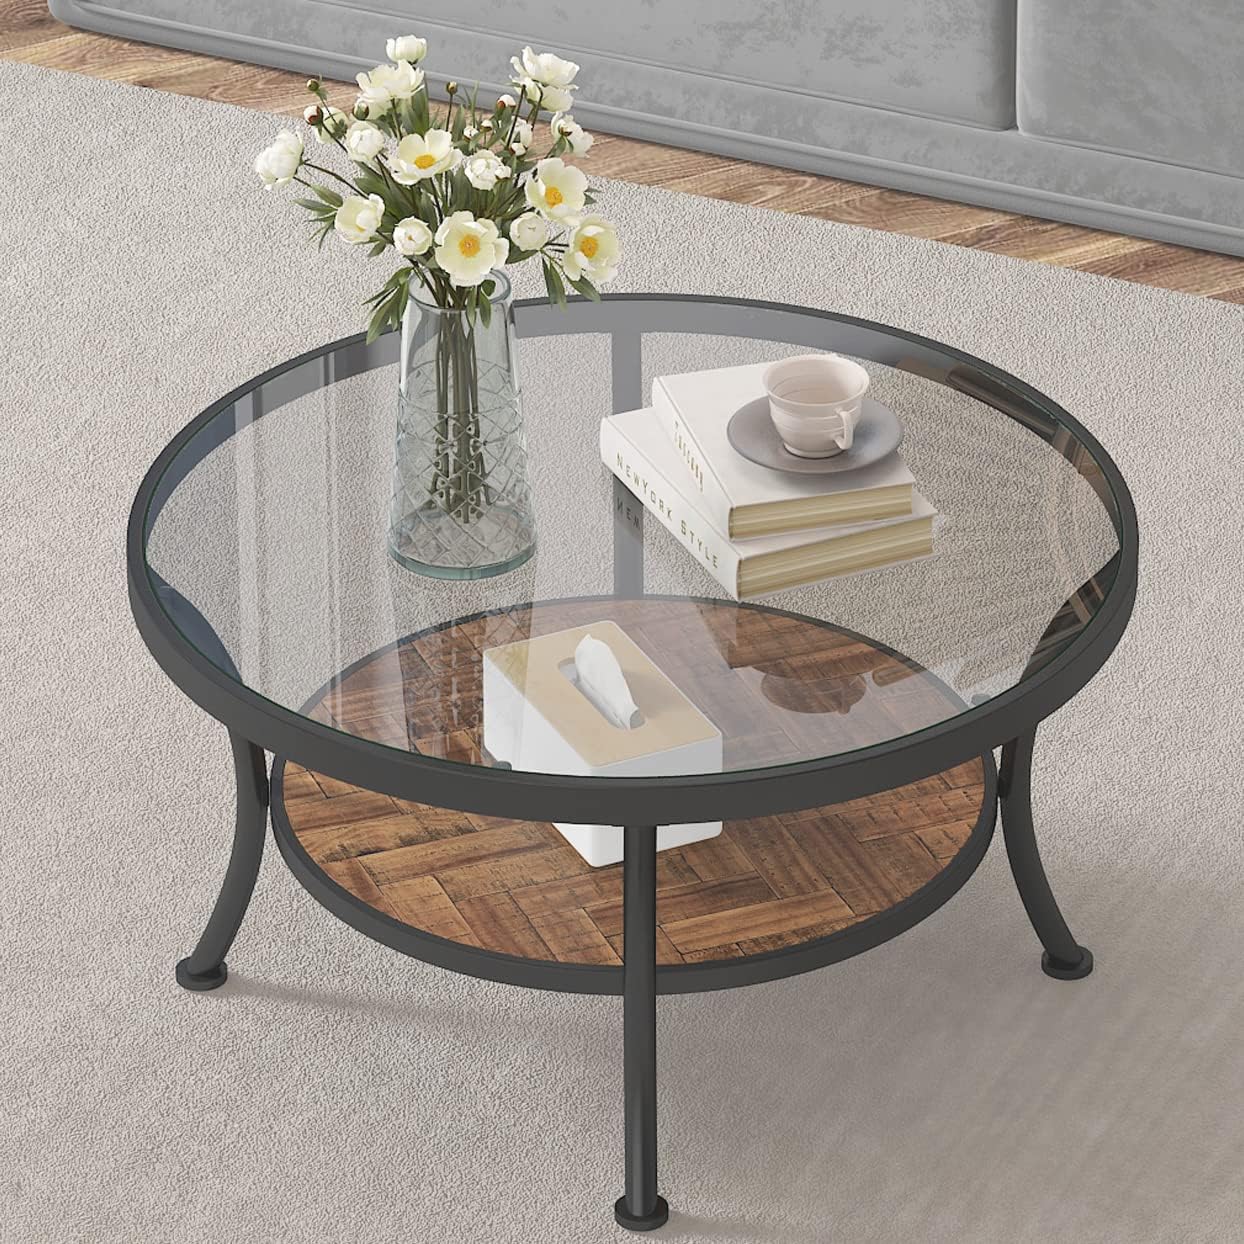 Round Coffee Table with Storage